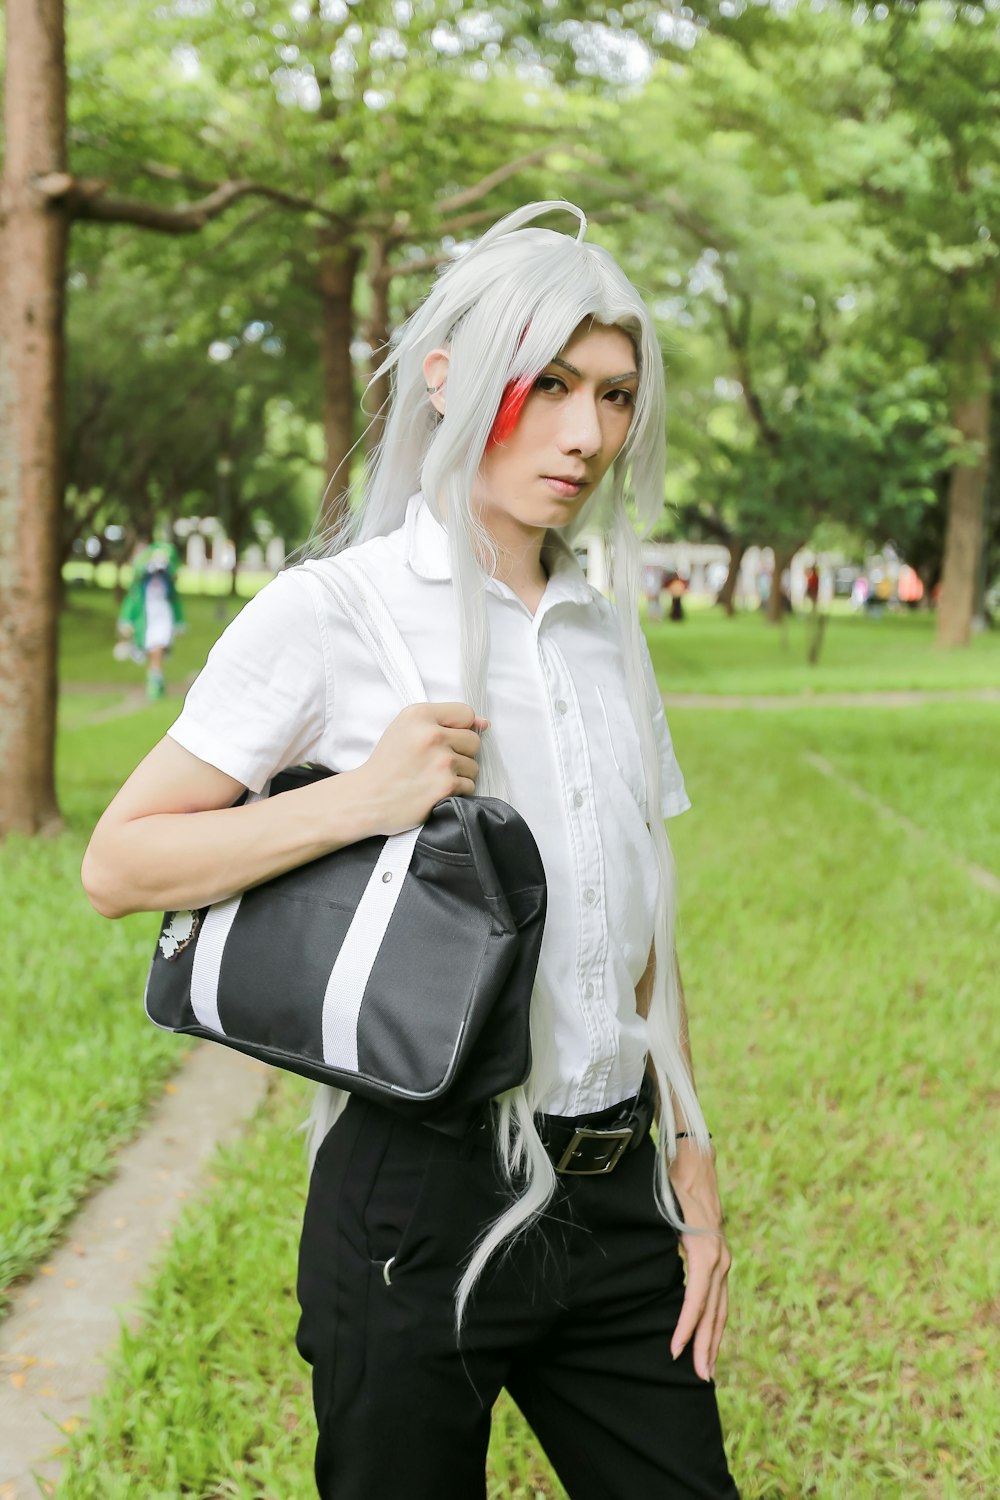 woman in white button up shirt and black and white backpack standing on green grass field